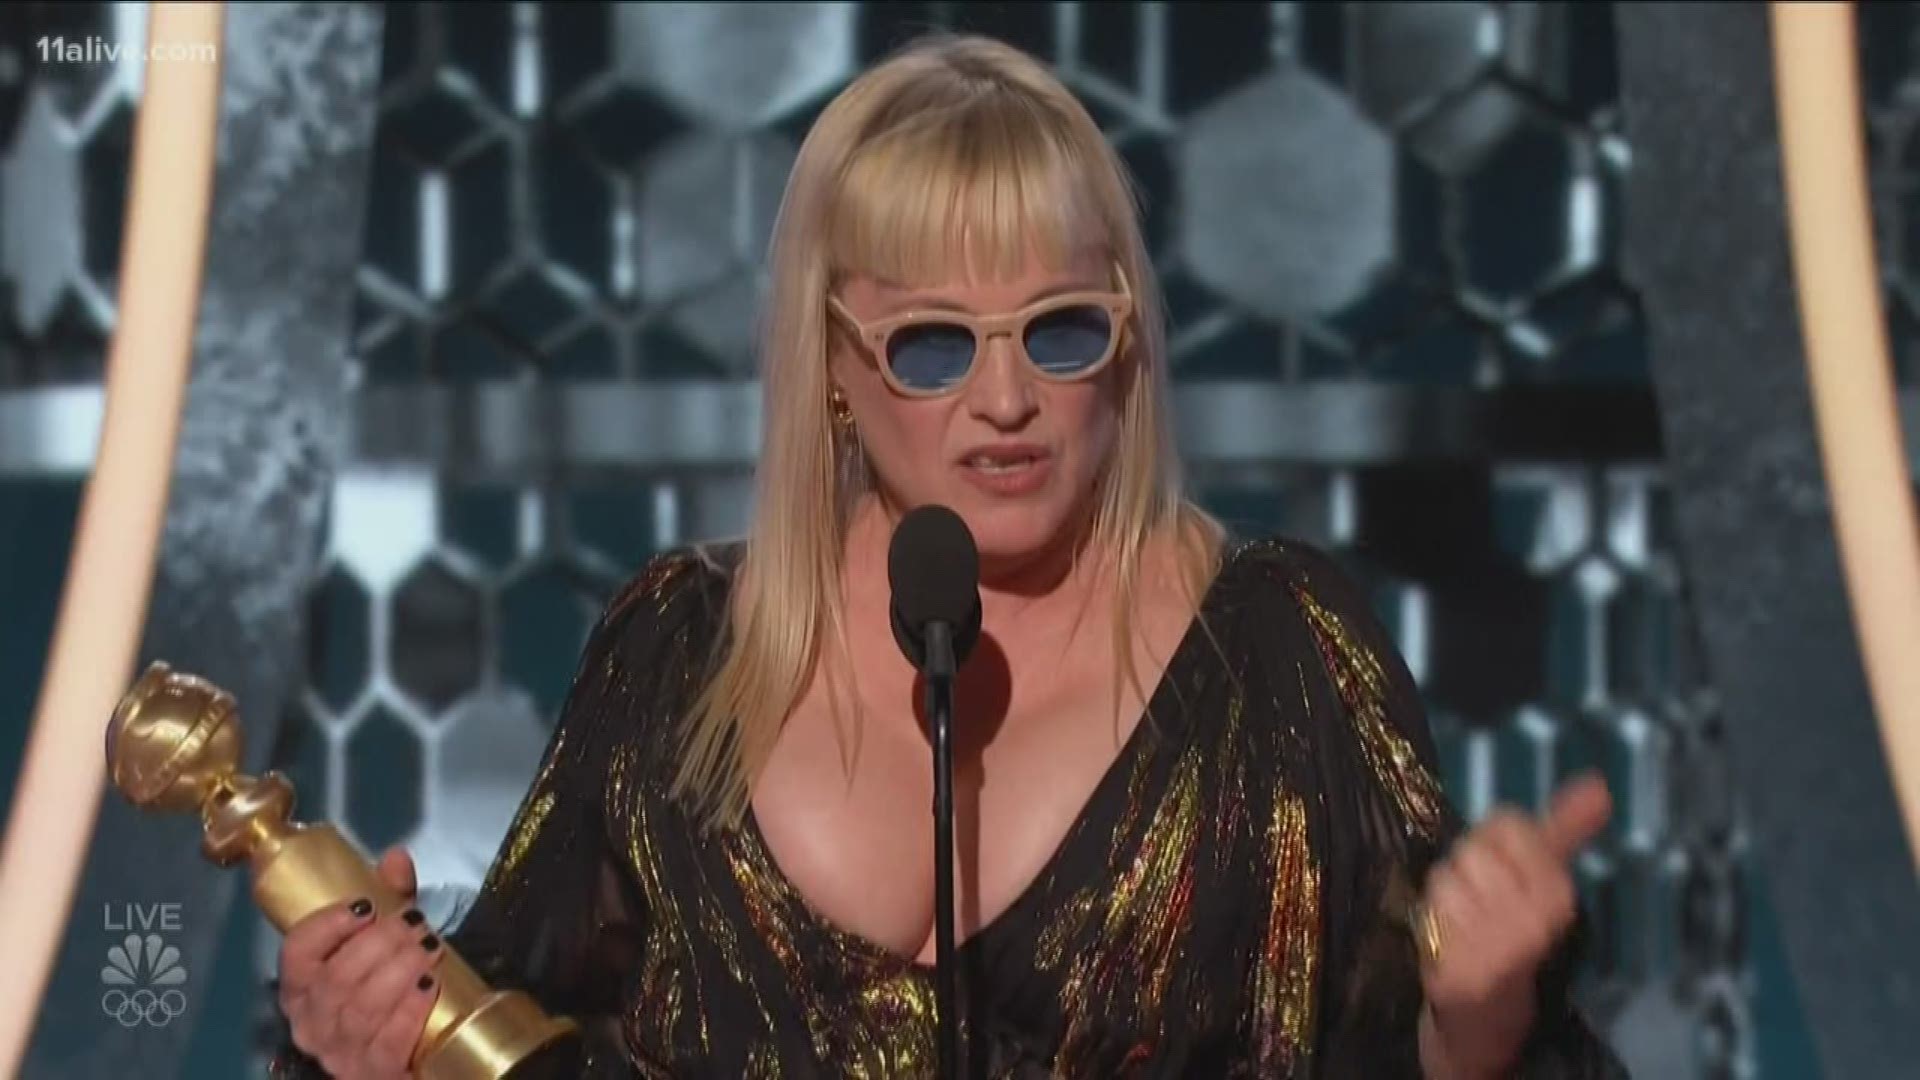 Patricia Arquette won a best supporting actress nod for her role in the Savannah-filmed "The Act."